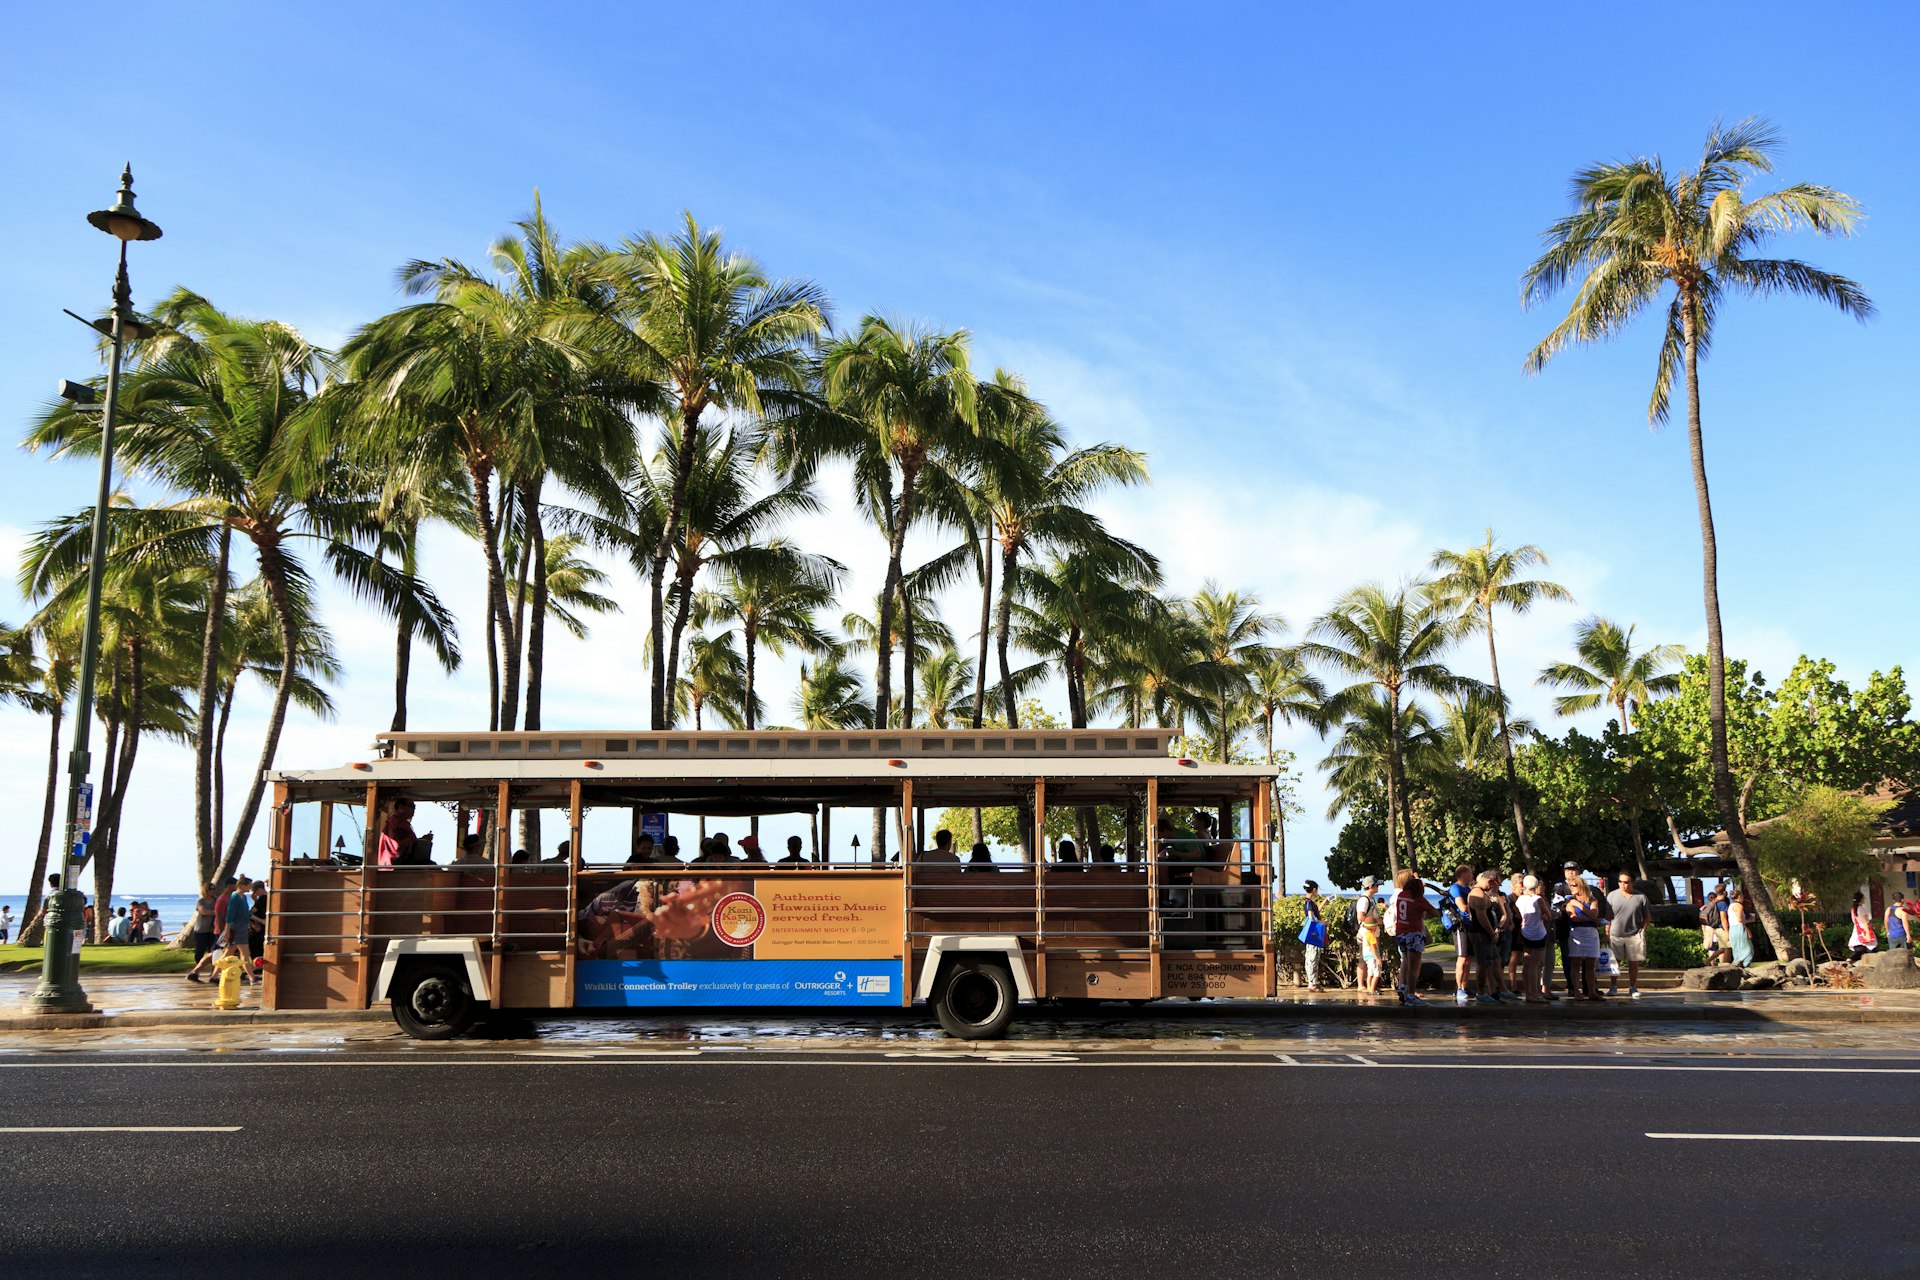 A trolley in Hawaii transports people